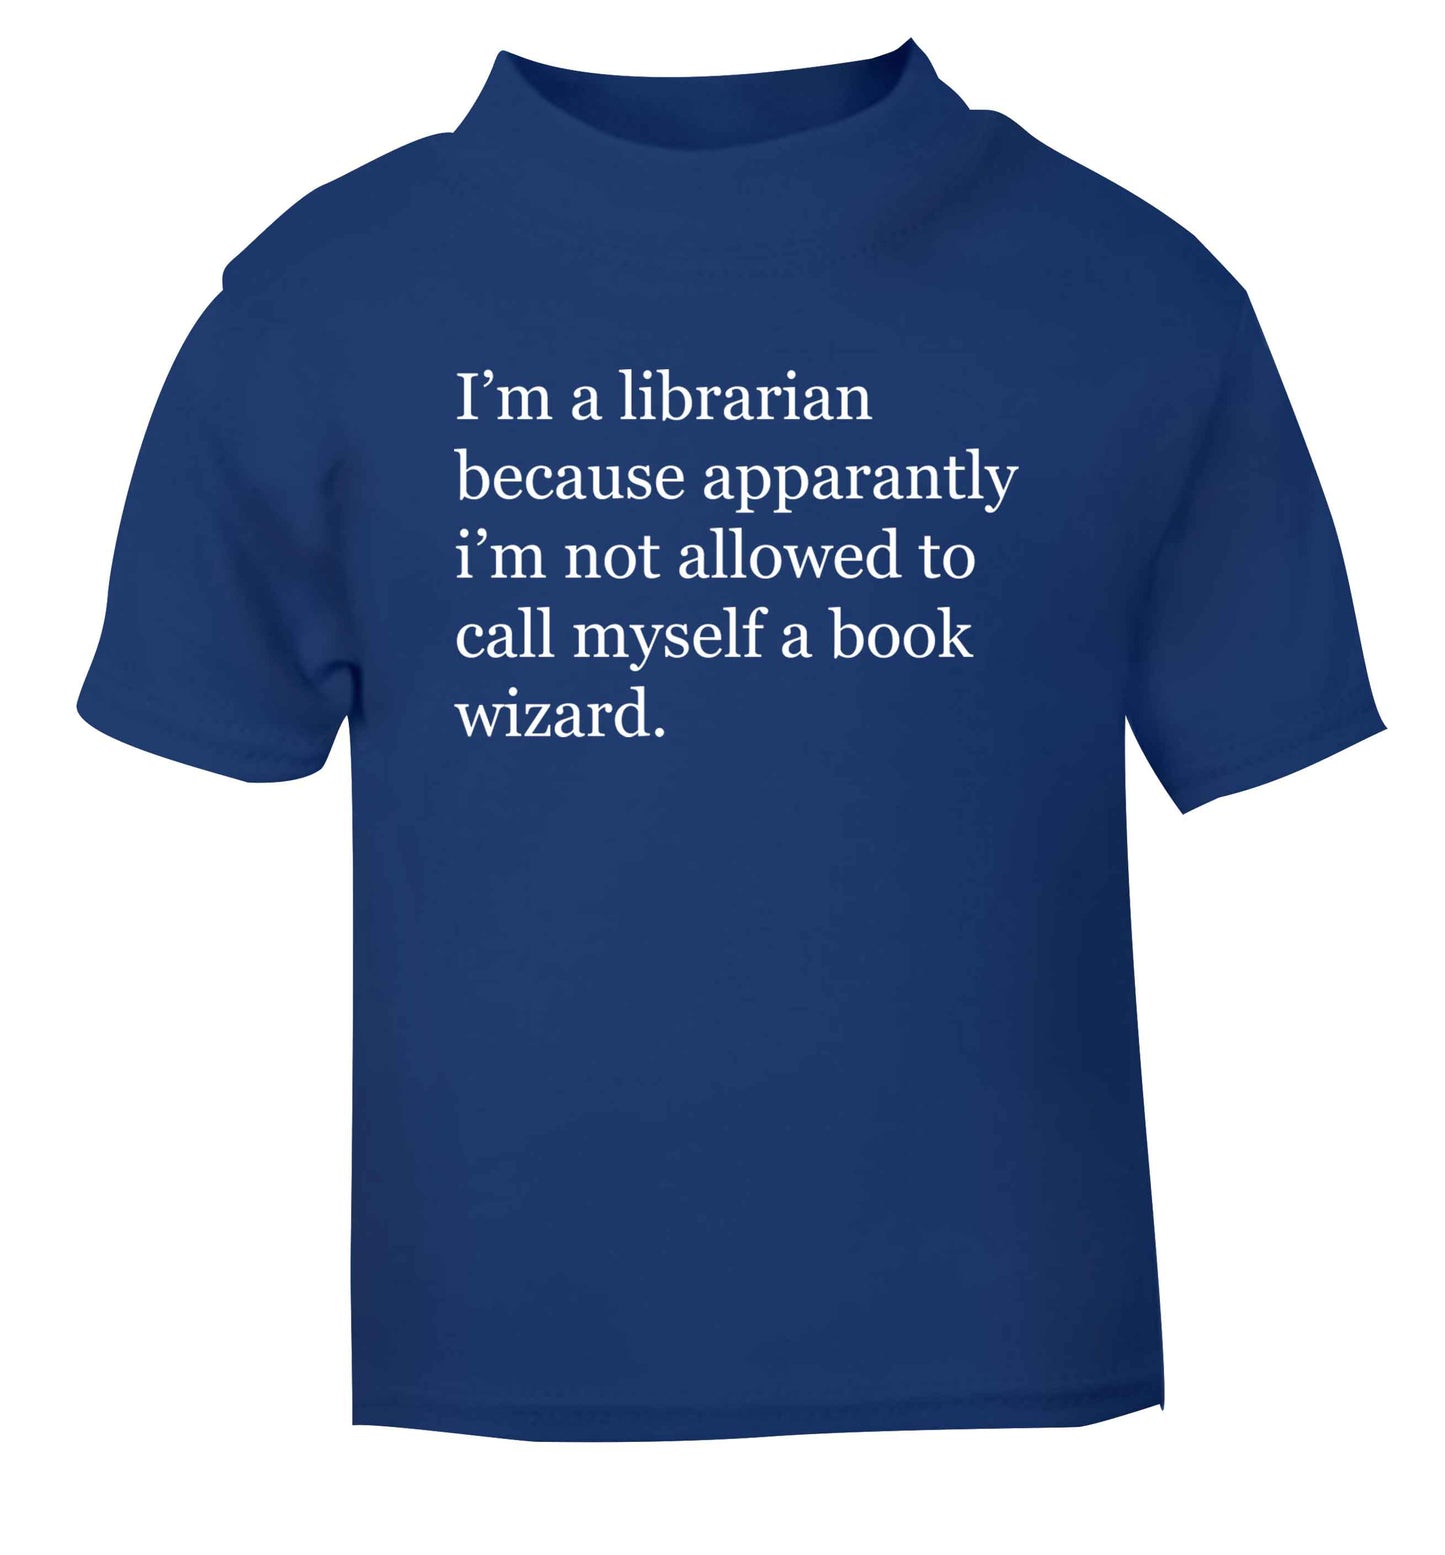 iÕm a librarian because apparantly iÕm not allowed to call myself a book wizard blue Baby Toddler Tshirt 2 Years